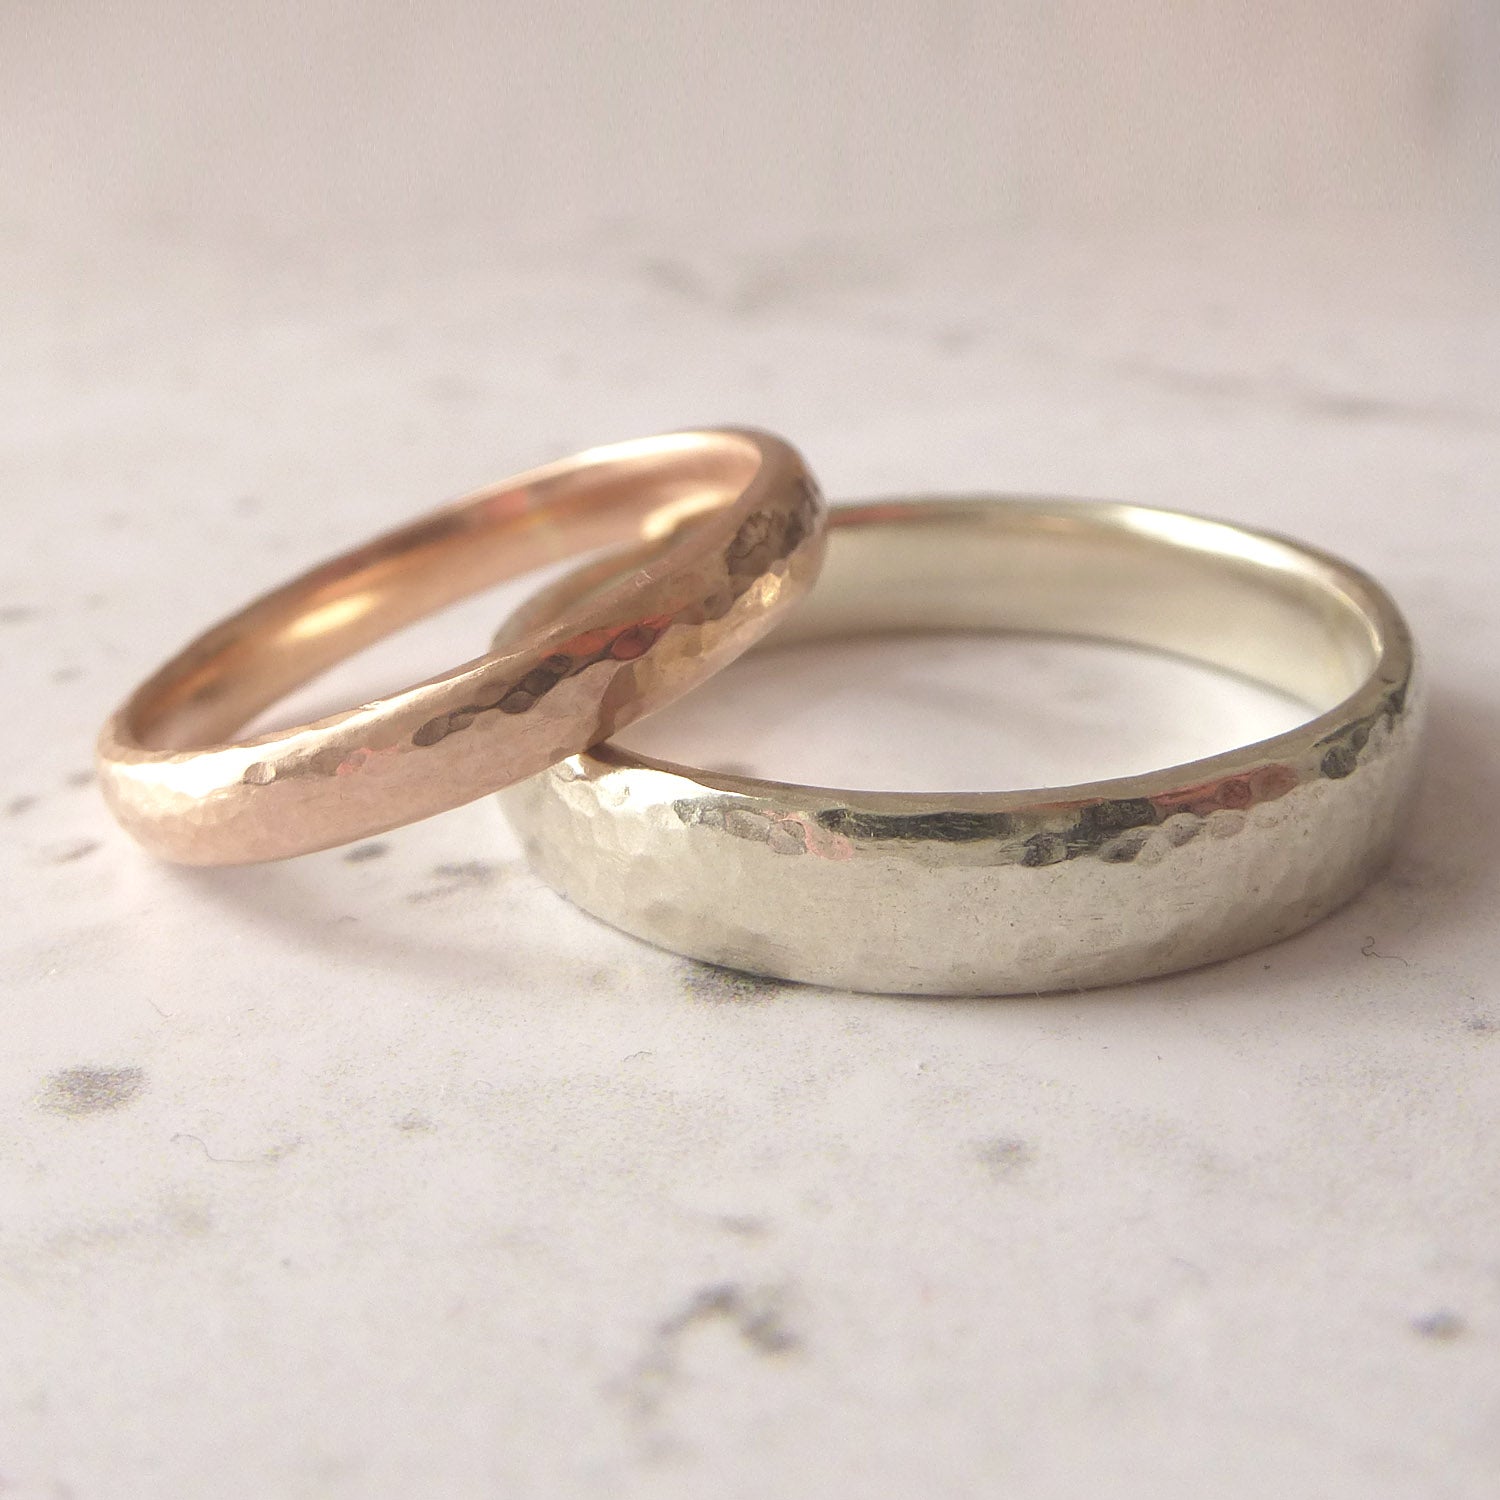 A pair of handmade wedding rings, 3mm in 9ct rose gold, 4mm in 9ct white gold